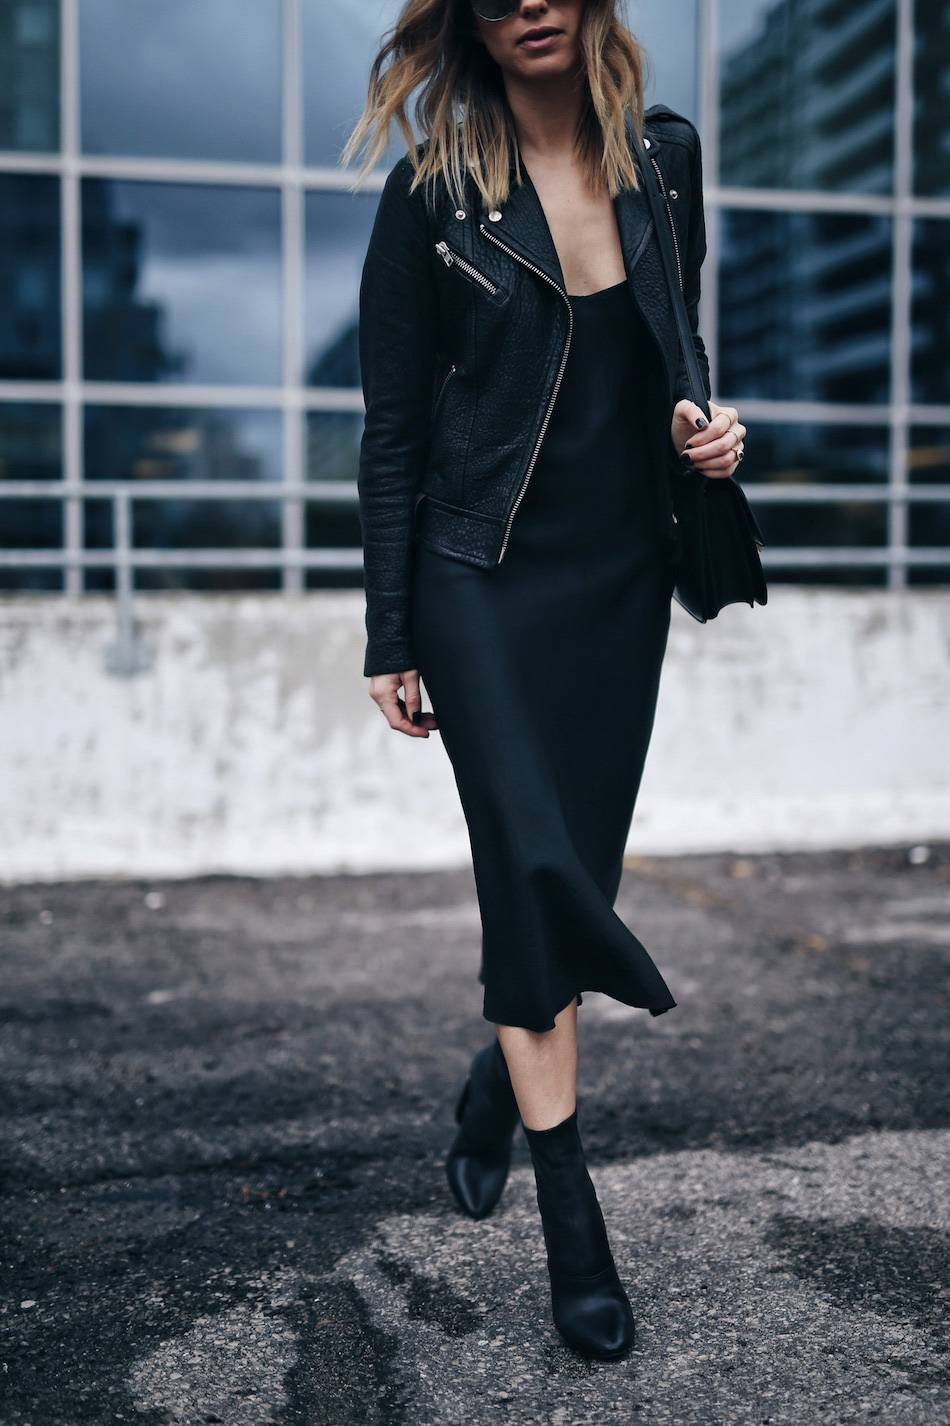 style-and-beauty-blogger-jill-lansky-of-the-august-diaries-in-a-mackage-rumer-leather-jacket-and-slip-dress-celine-bag-and-3-1-phillip-lim-kyoto-boots